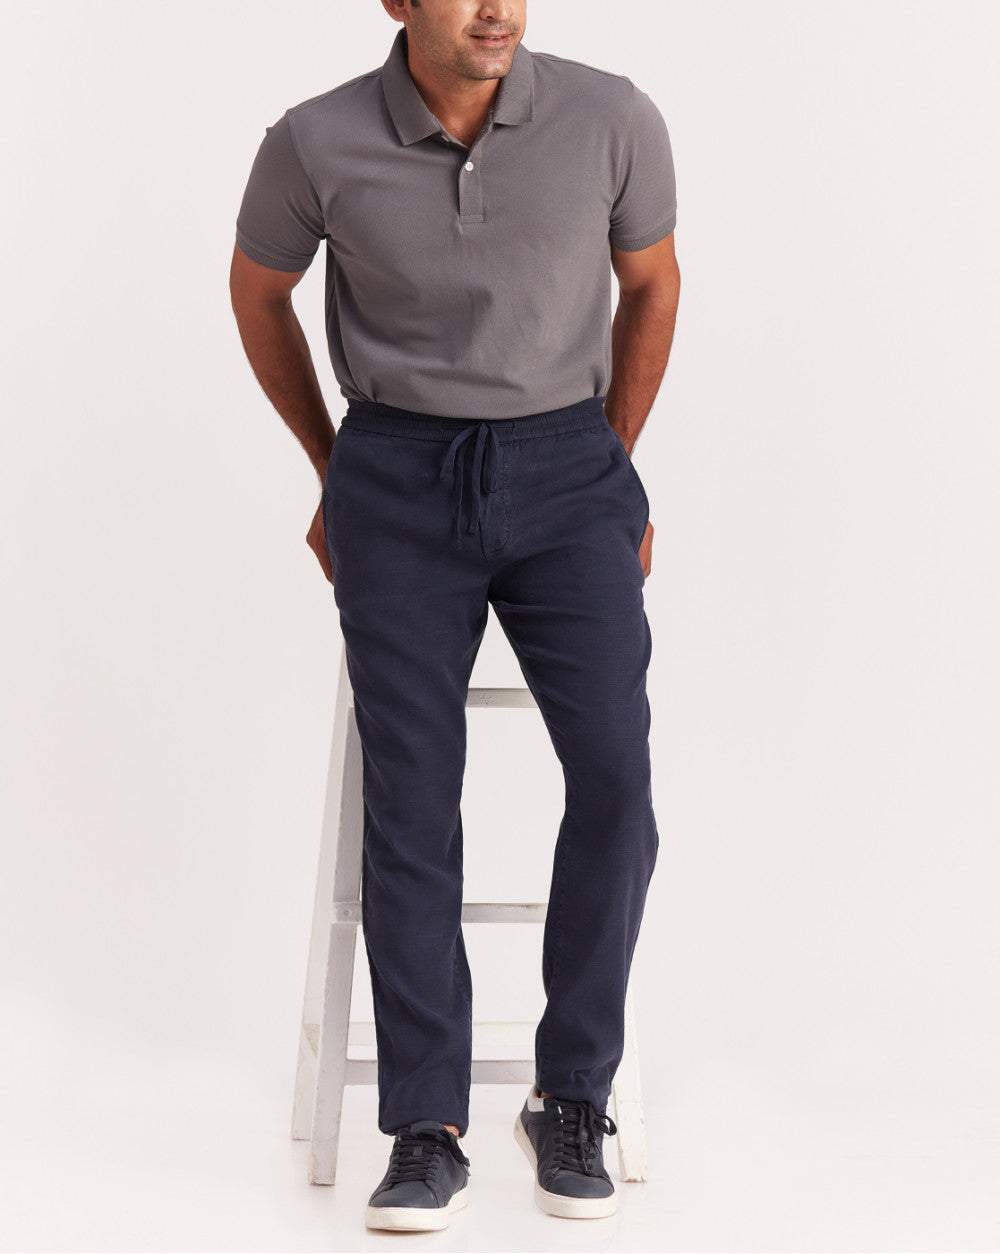 Tapered Fit Comfort Pants - Navy